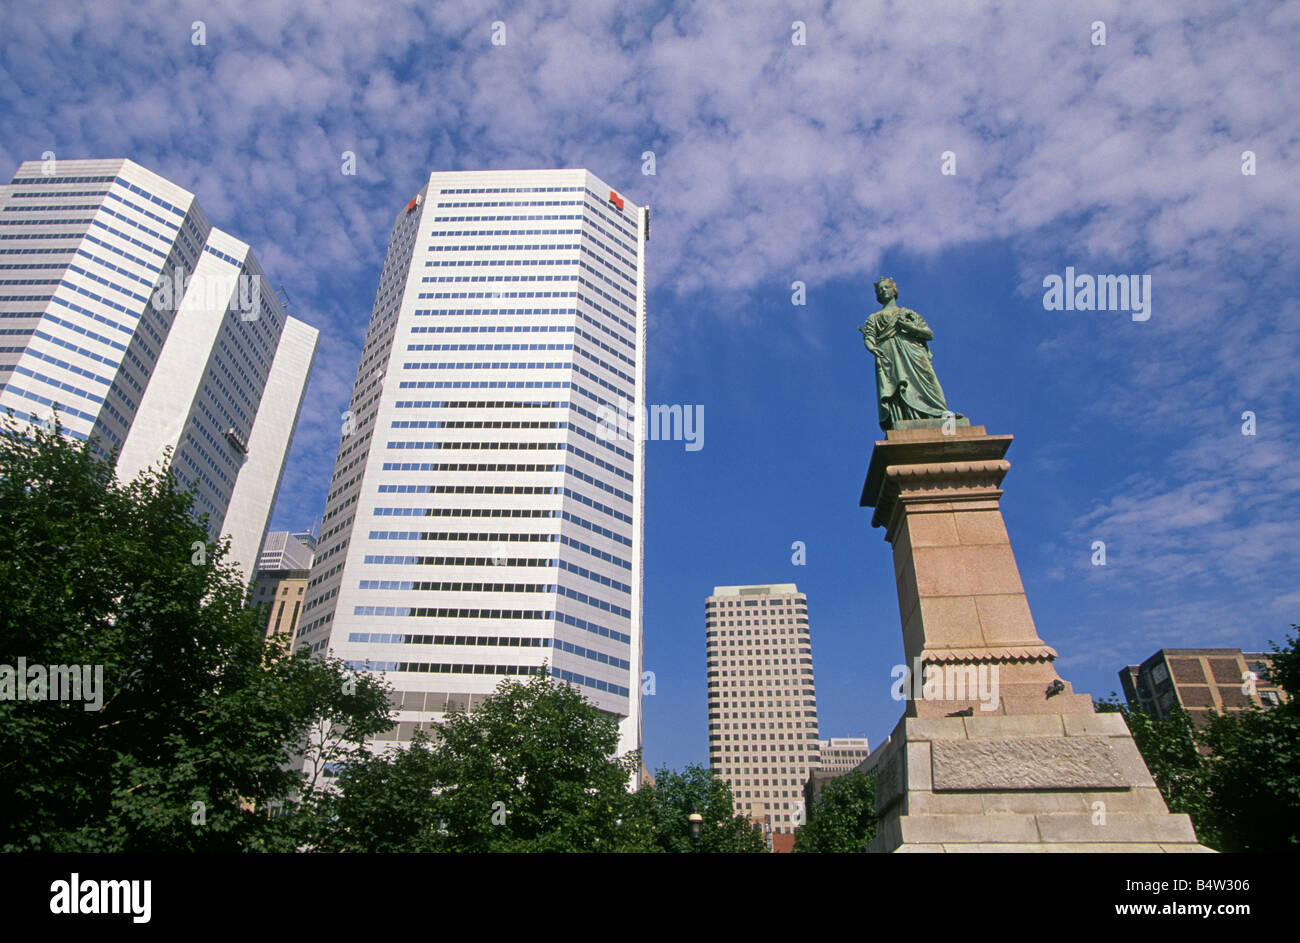 A view of the statue of Queen Victoria in Queen Victoria Square surrounded by skyscrapers in downtown Montreal, Montreal, Canada. Stock Photo